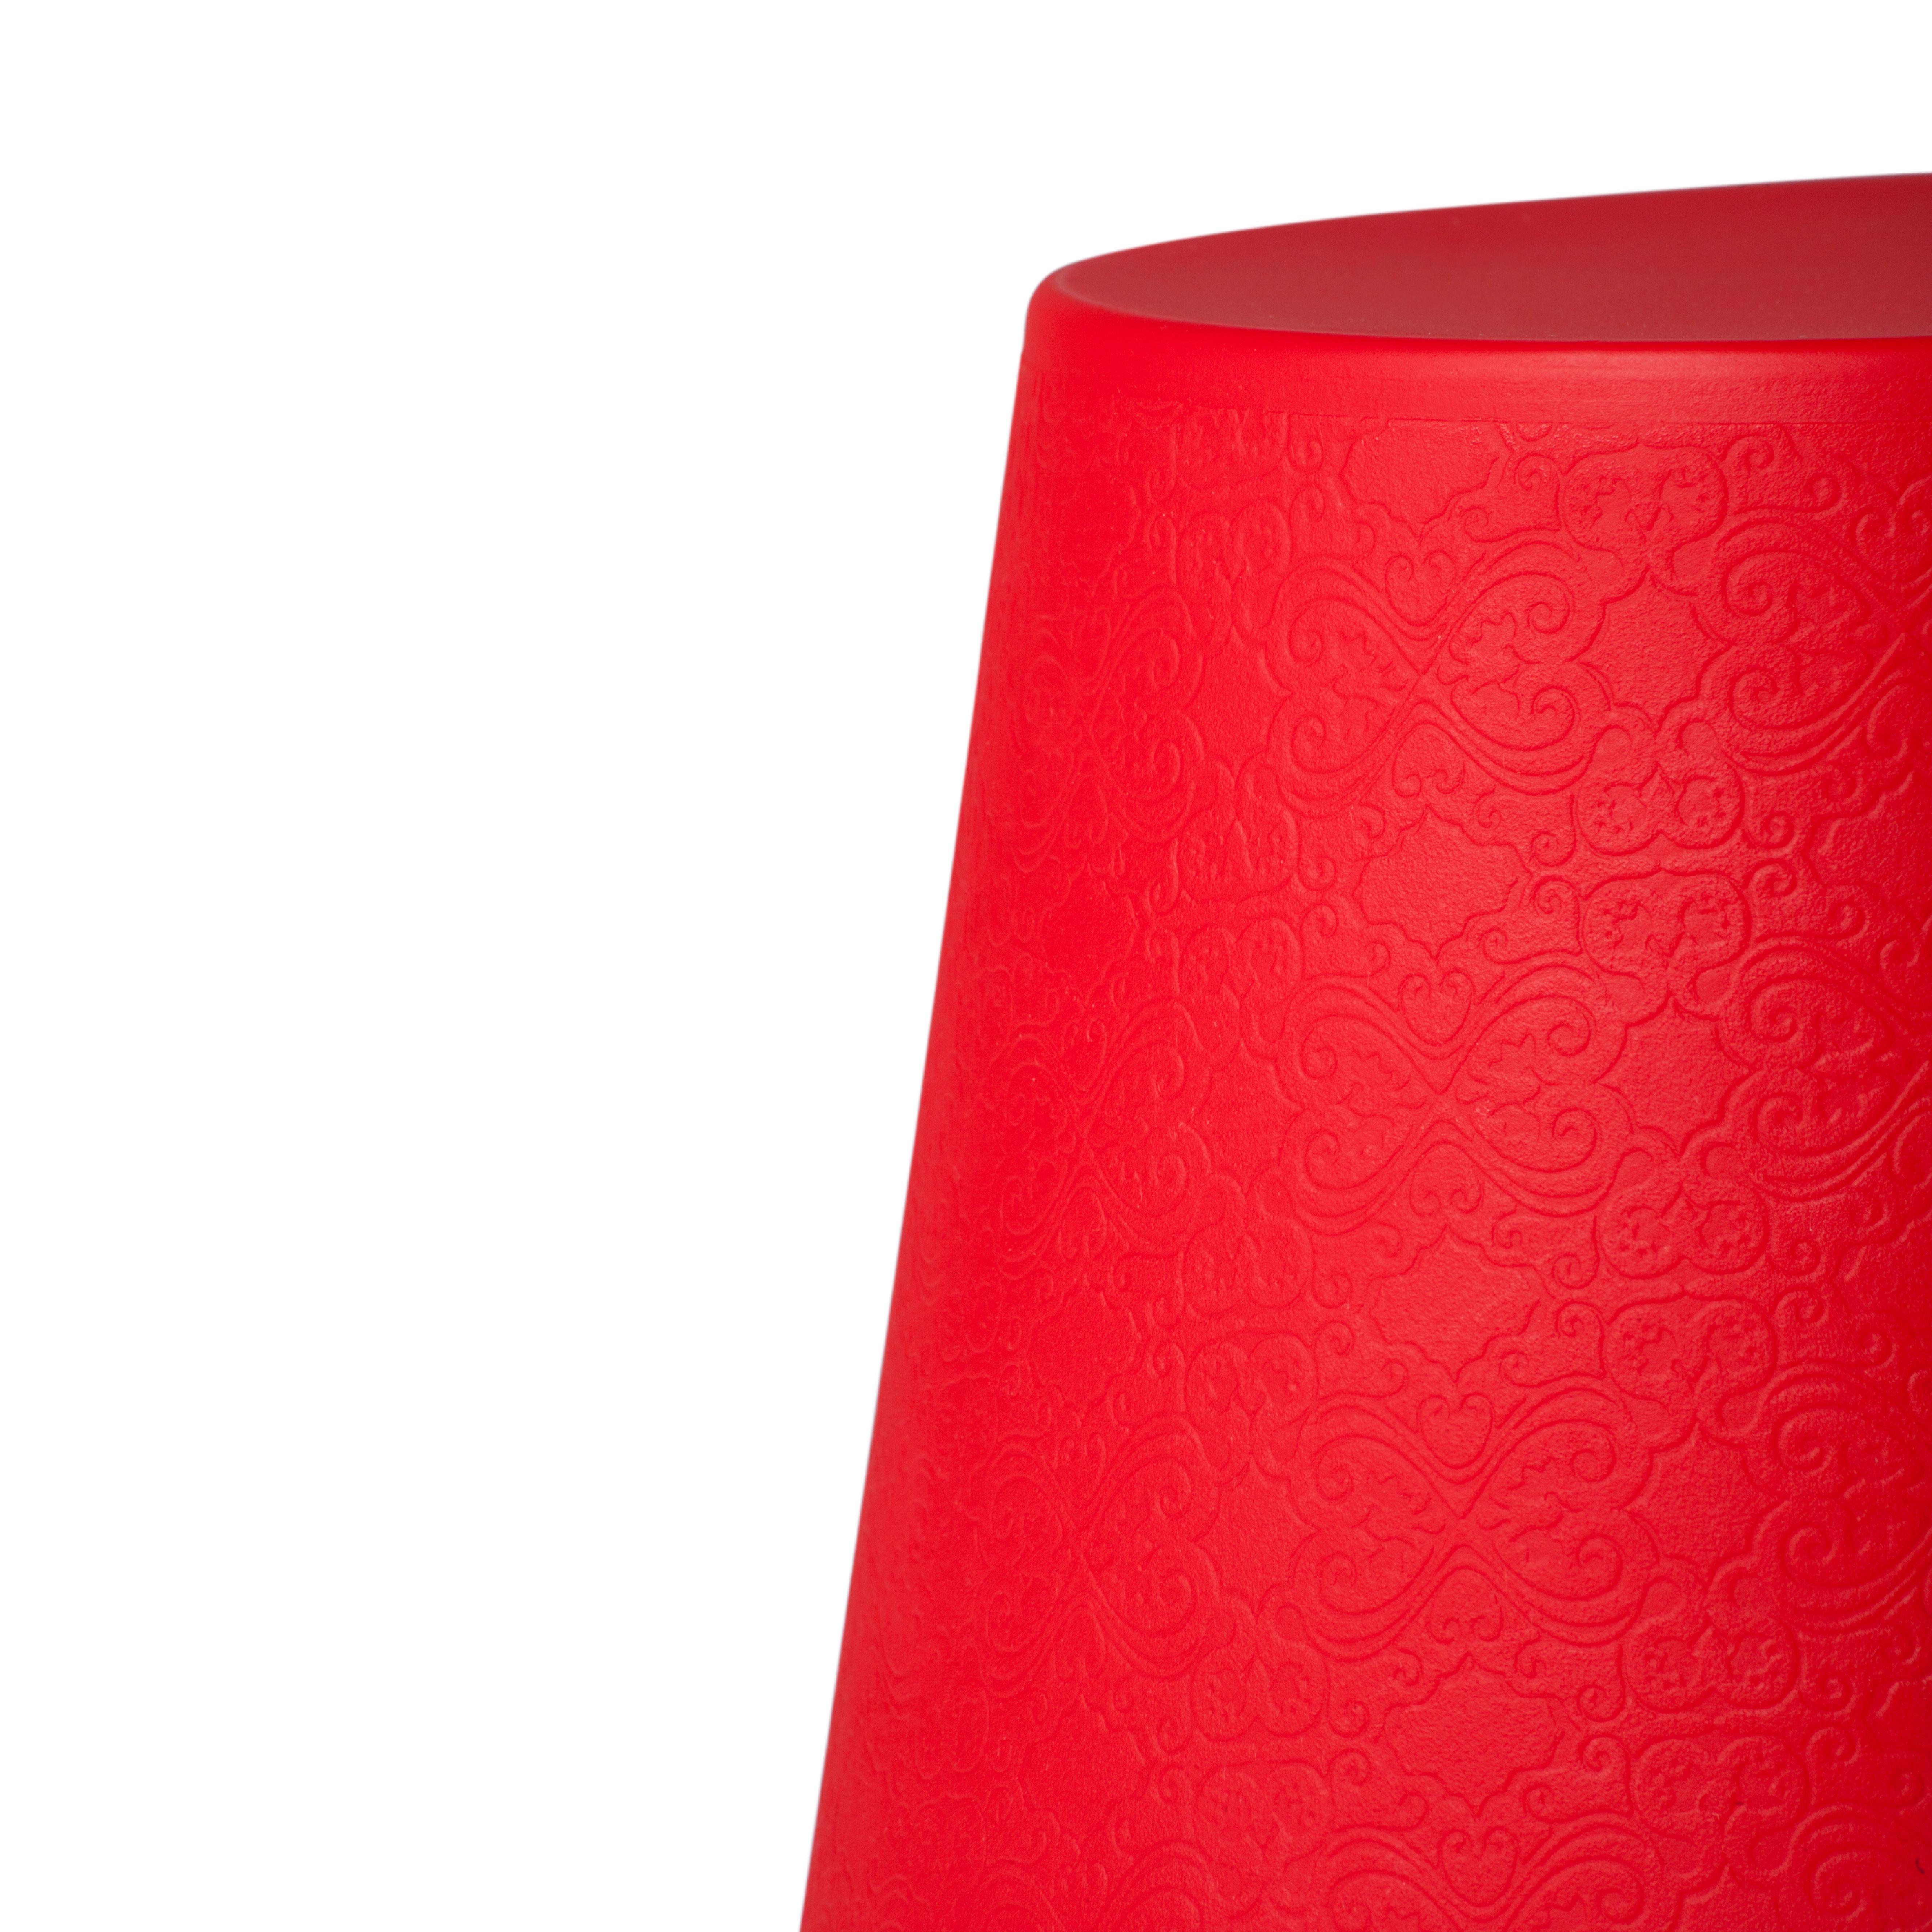 Italian Slide Design Ali Baba Stool in Flame Red by Giò Colonna Romano For Sale